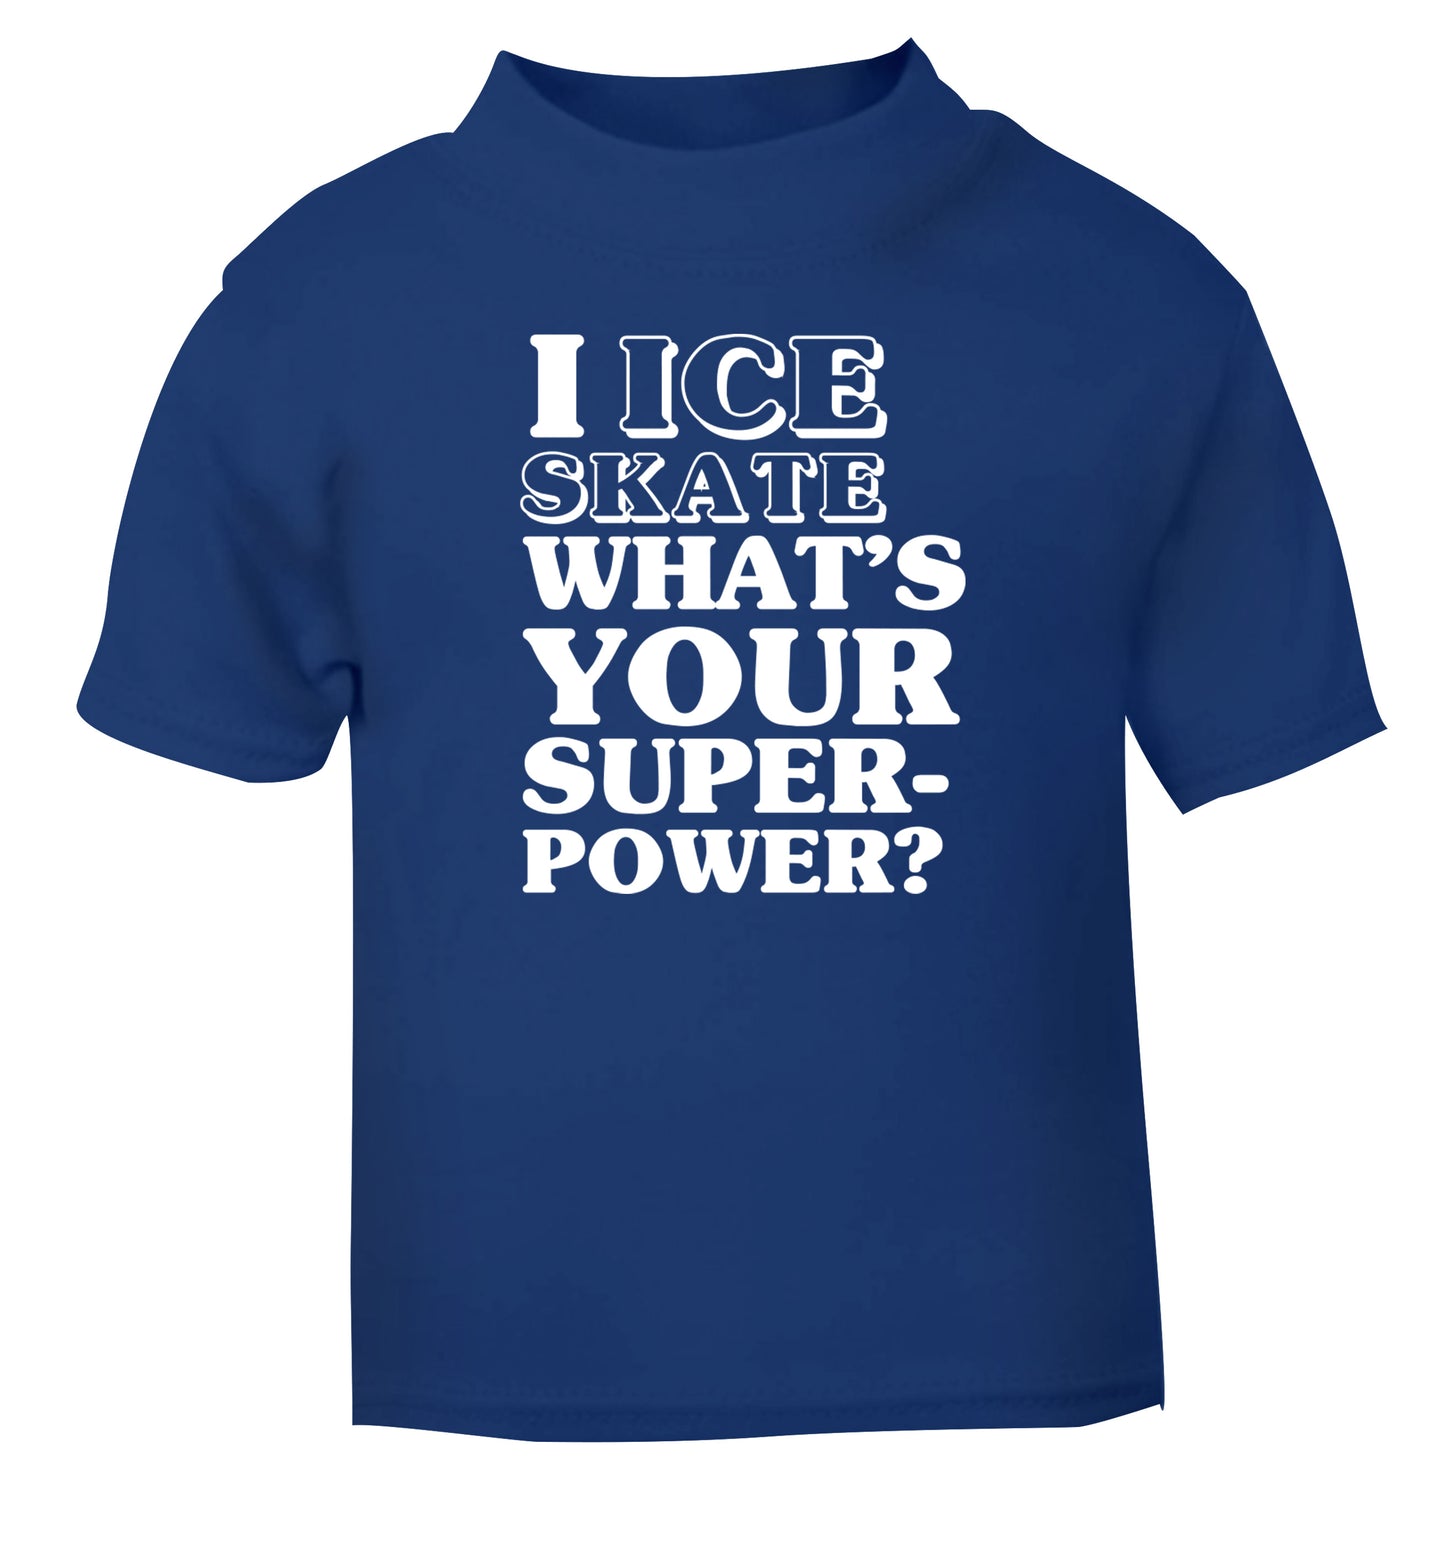 I ice skate what's your superpower? blue Baby Toddler Tshirt 2 Years